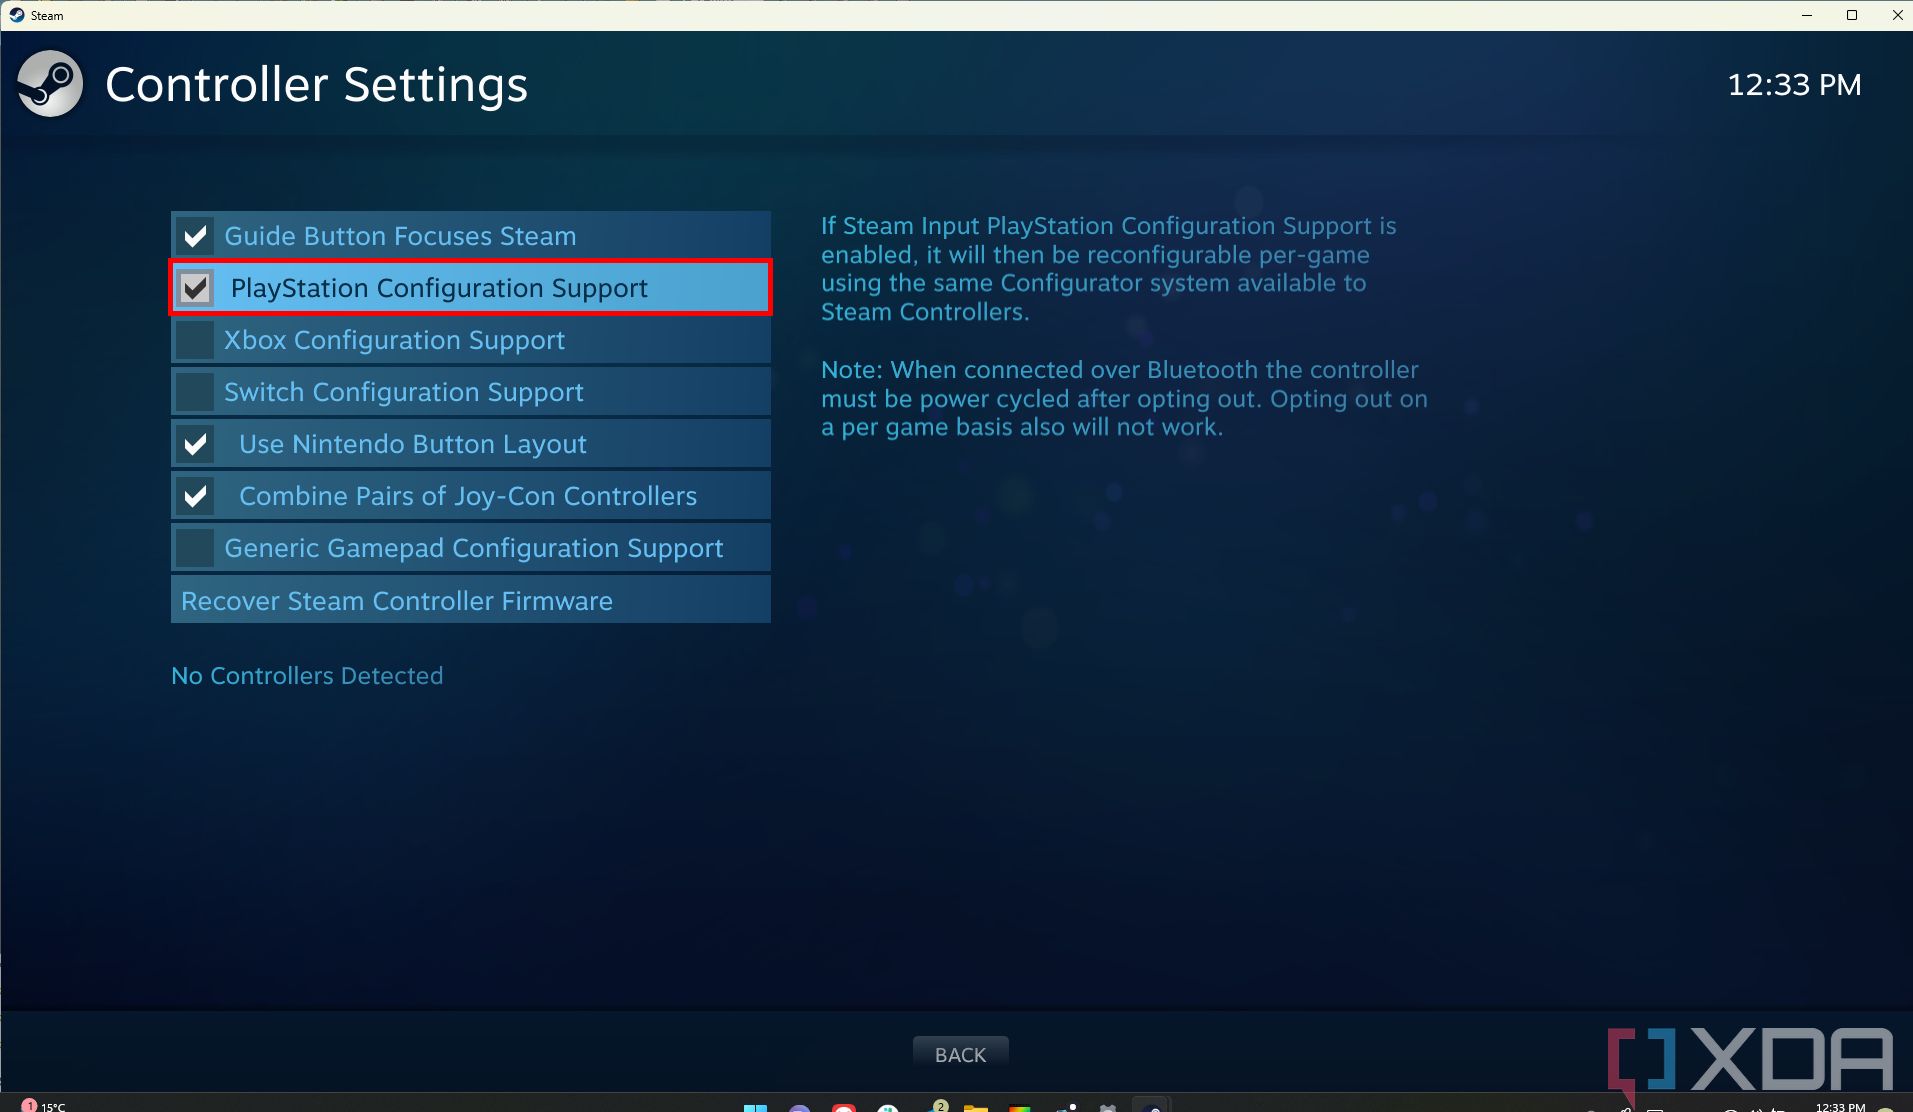 Screenshot of the Steam controller settings window with PlayStation configuration support enabled and highlighted with a red border.